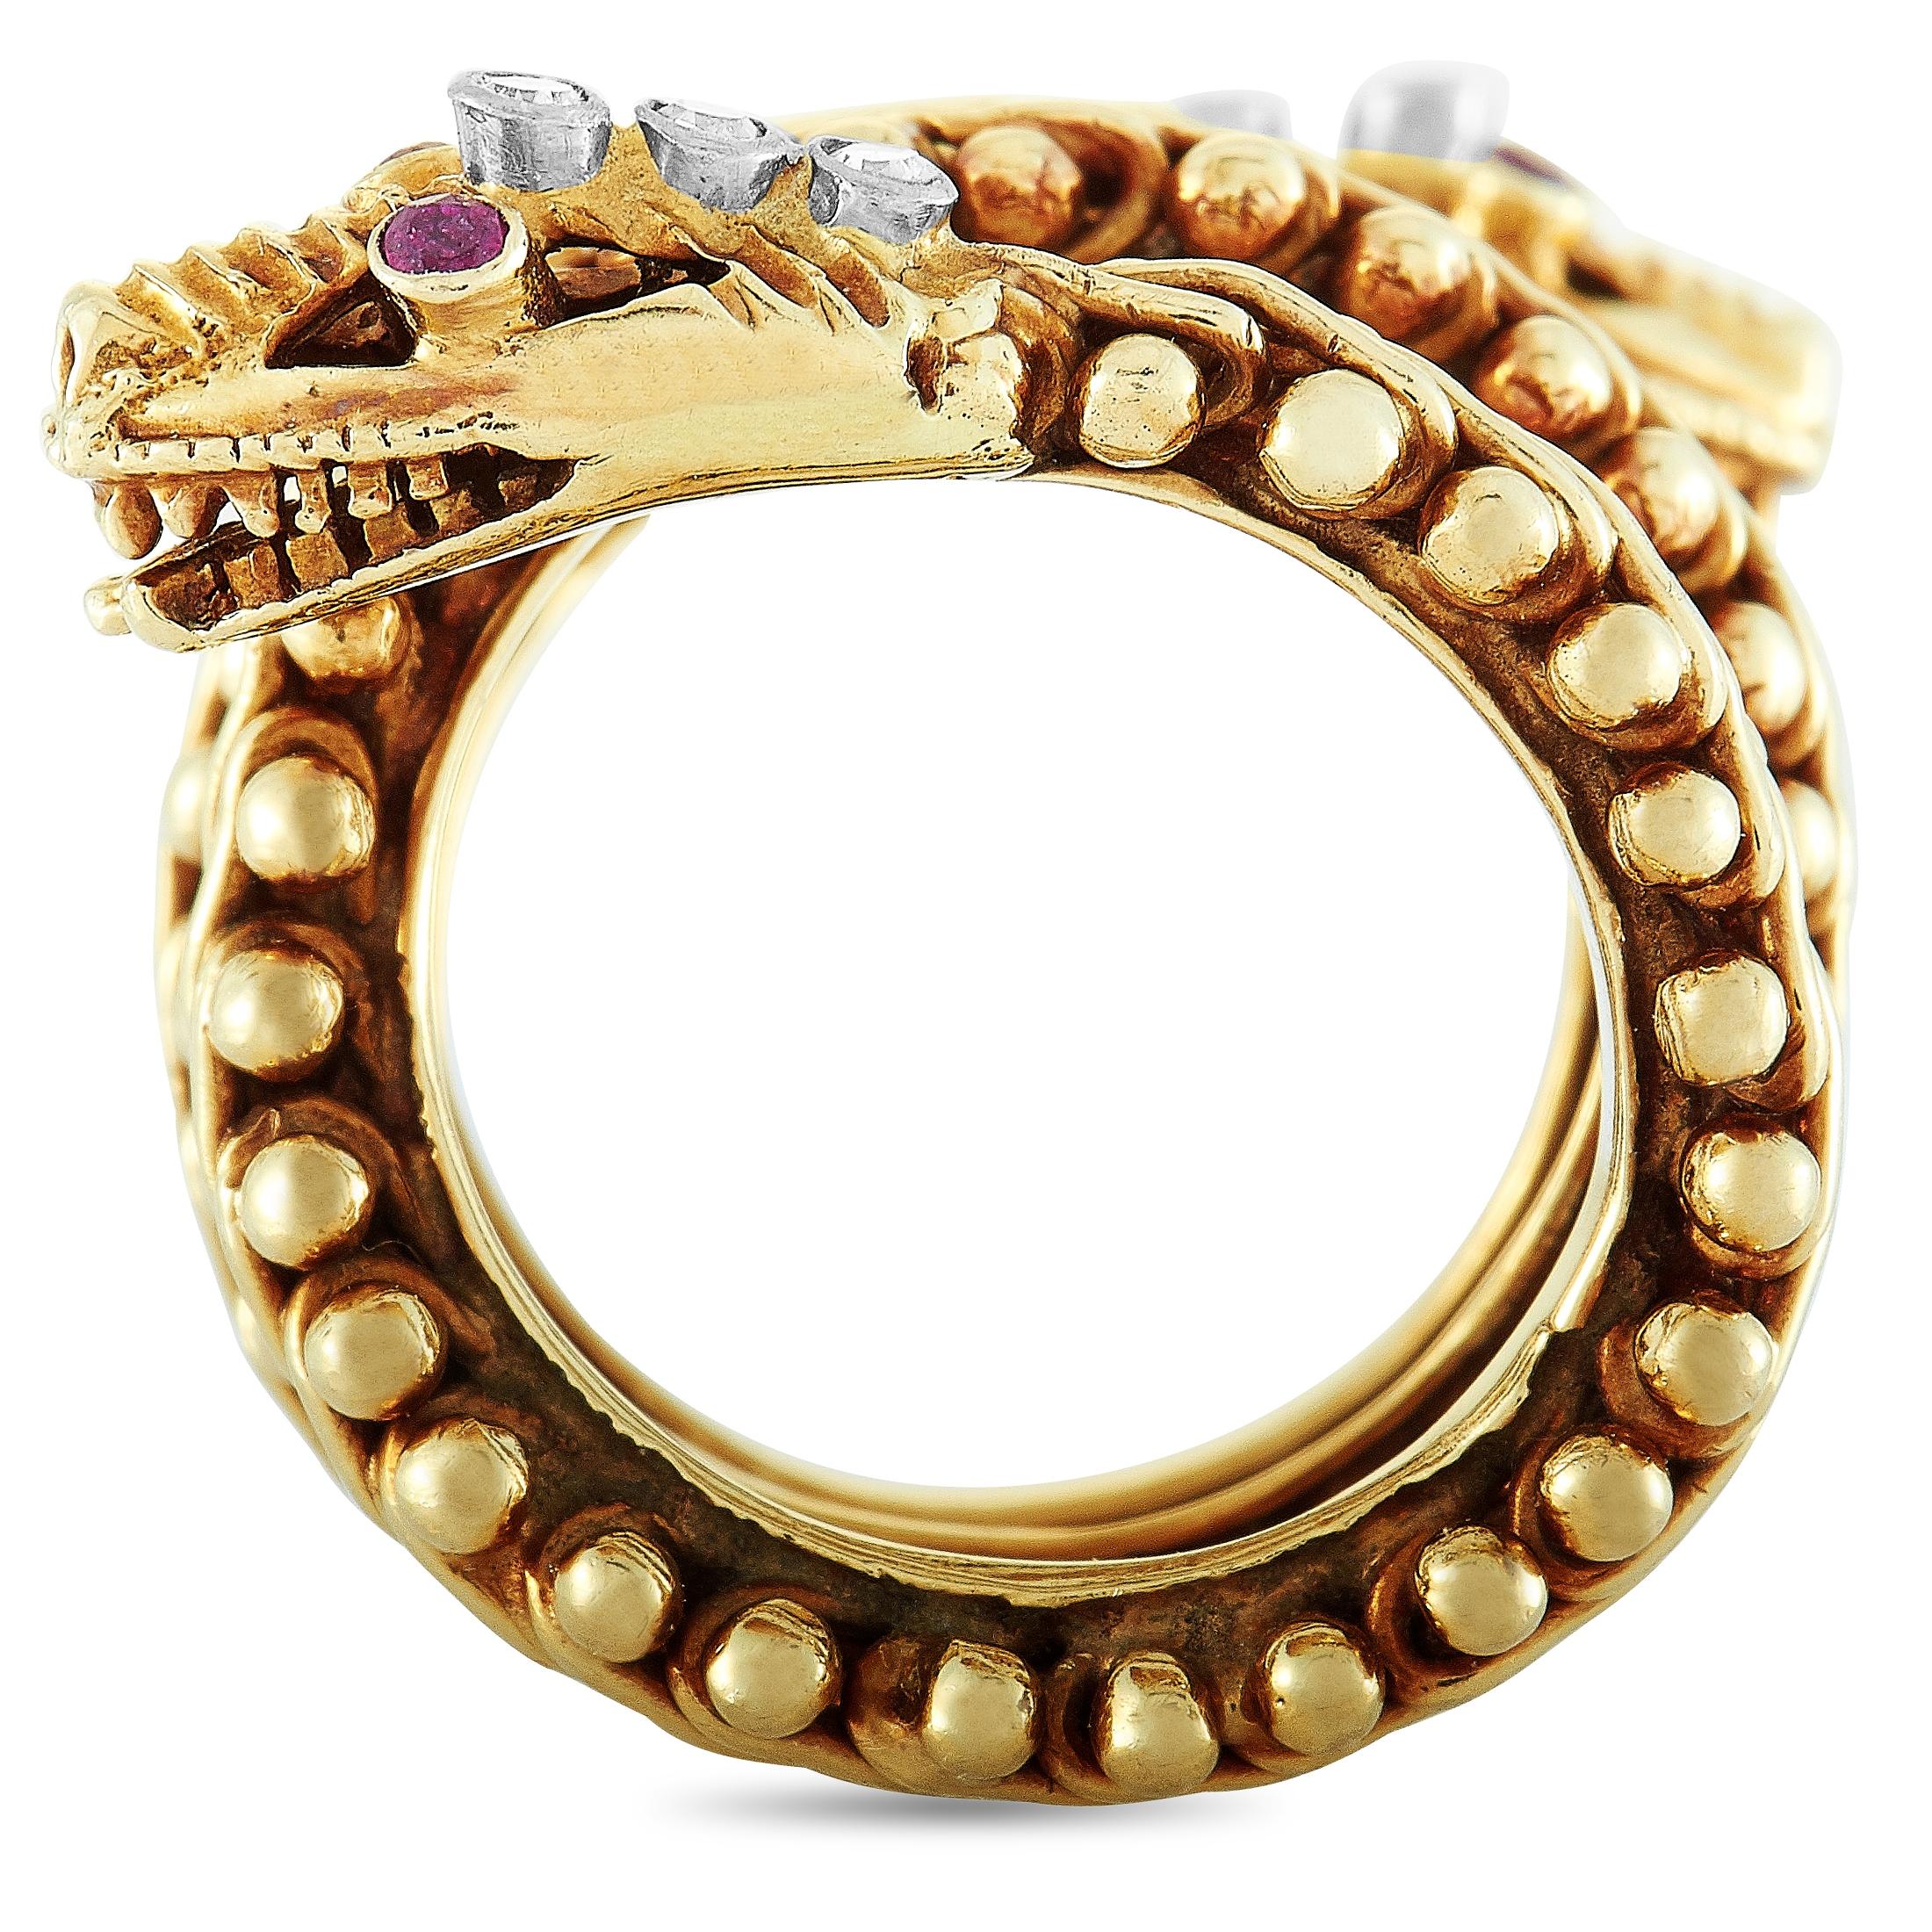 This Ilias Lalaounis snake ring is made of 18K yellow gold and set with diamonds and rubies. The ring boasts band thickness of 22 mm and top height of 5 mm, while top dimensions measure 24 by 35 mm.
 
 Offered in estate condition, this item includes